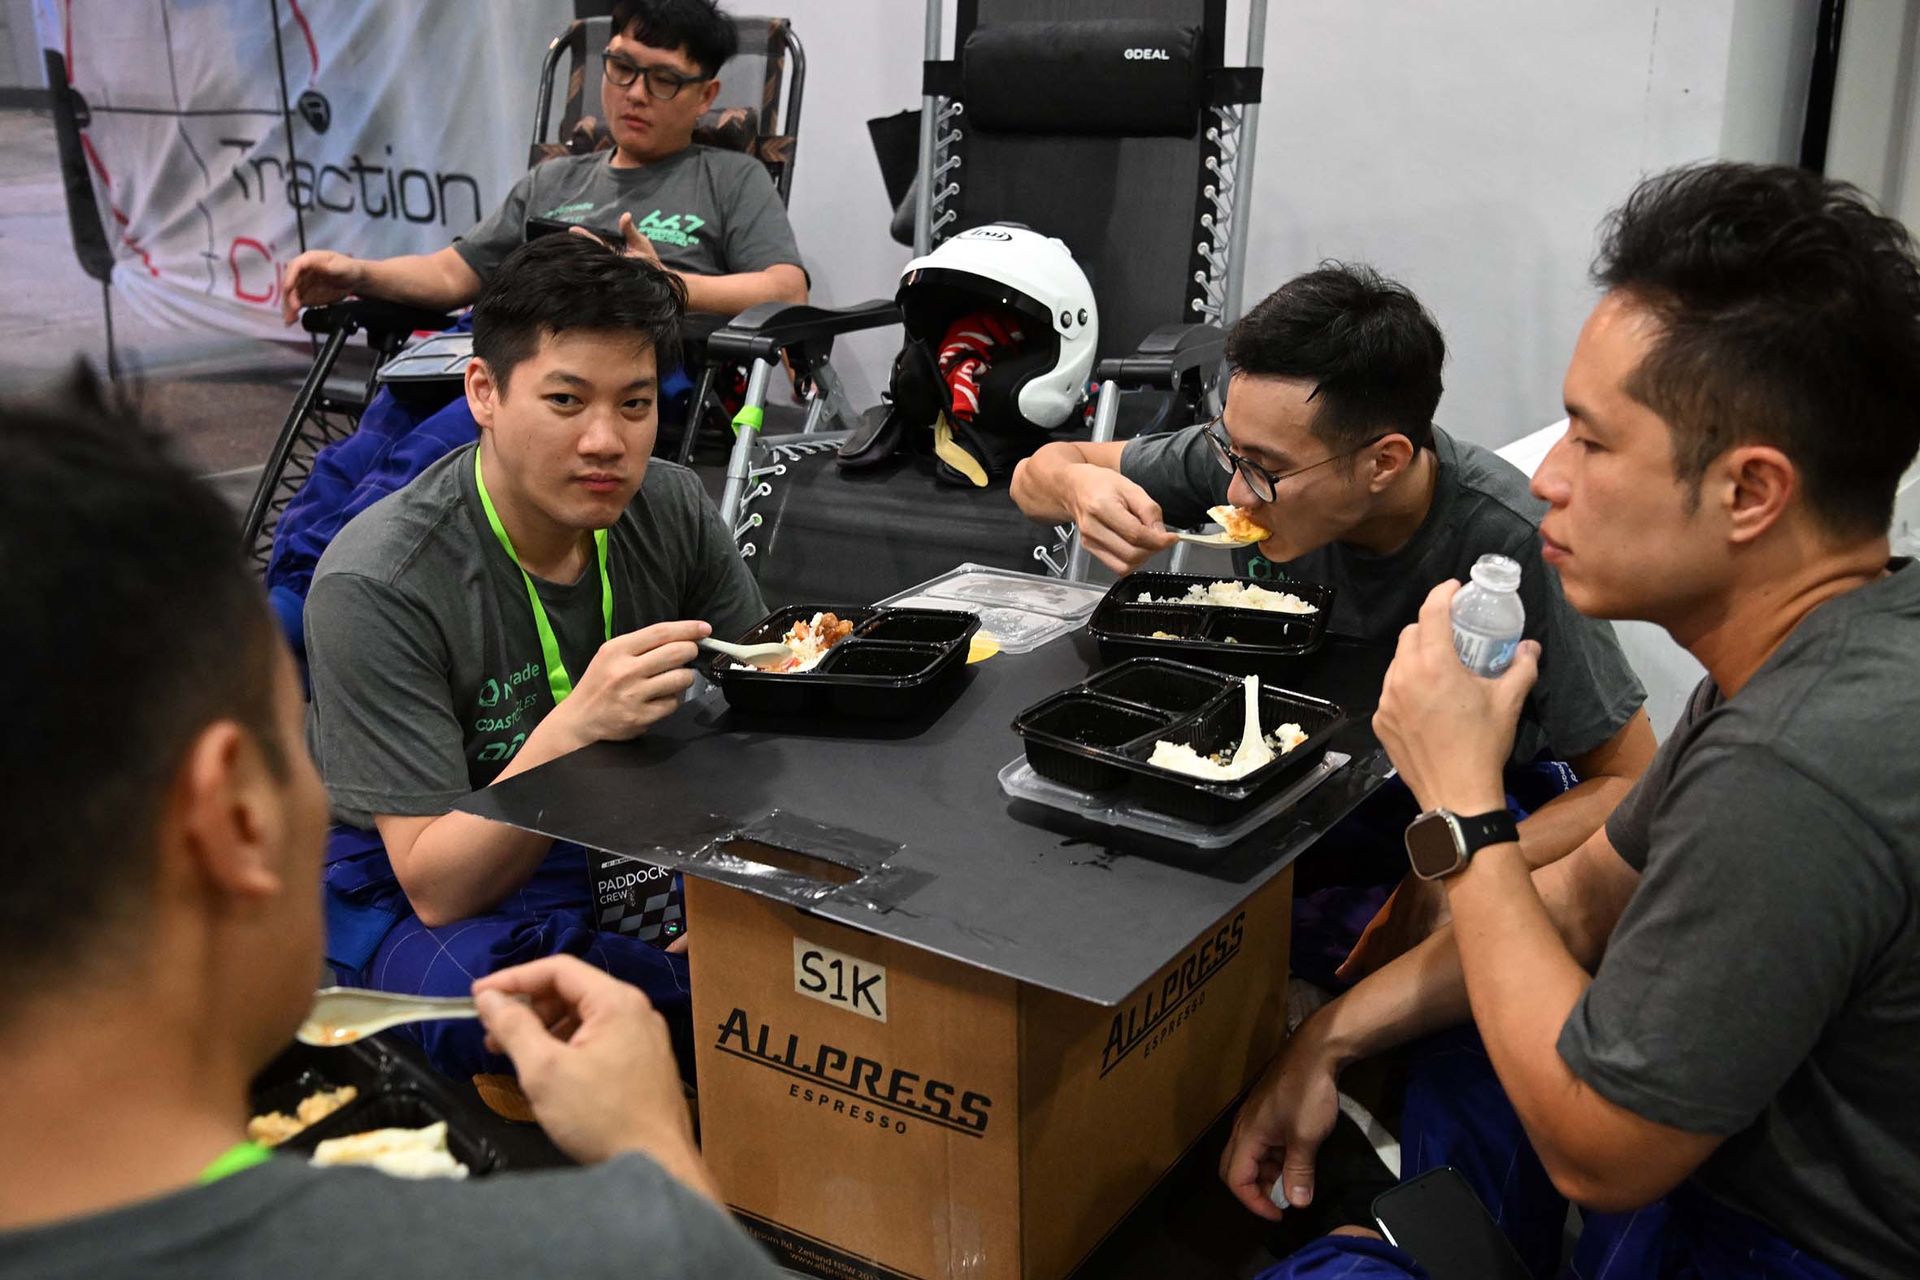 The pit crew from Team 667 having a quick meal during the Sepang 1000km Endurance Race.